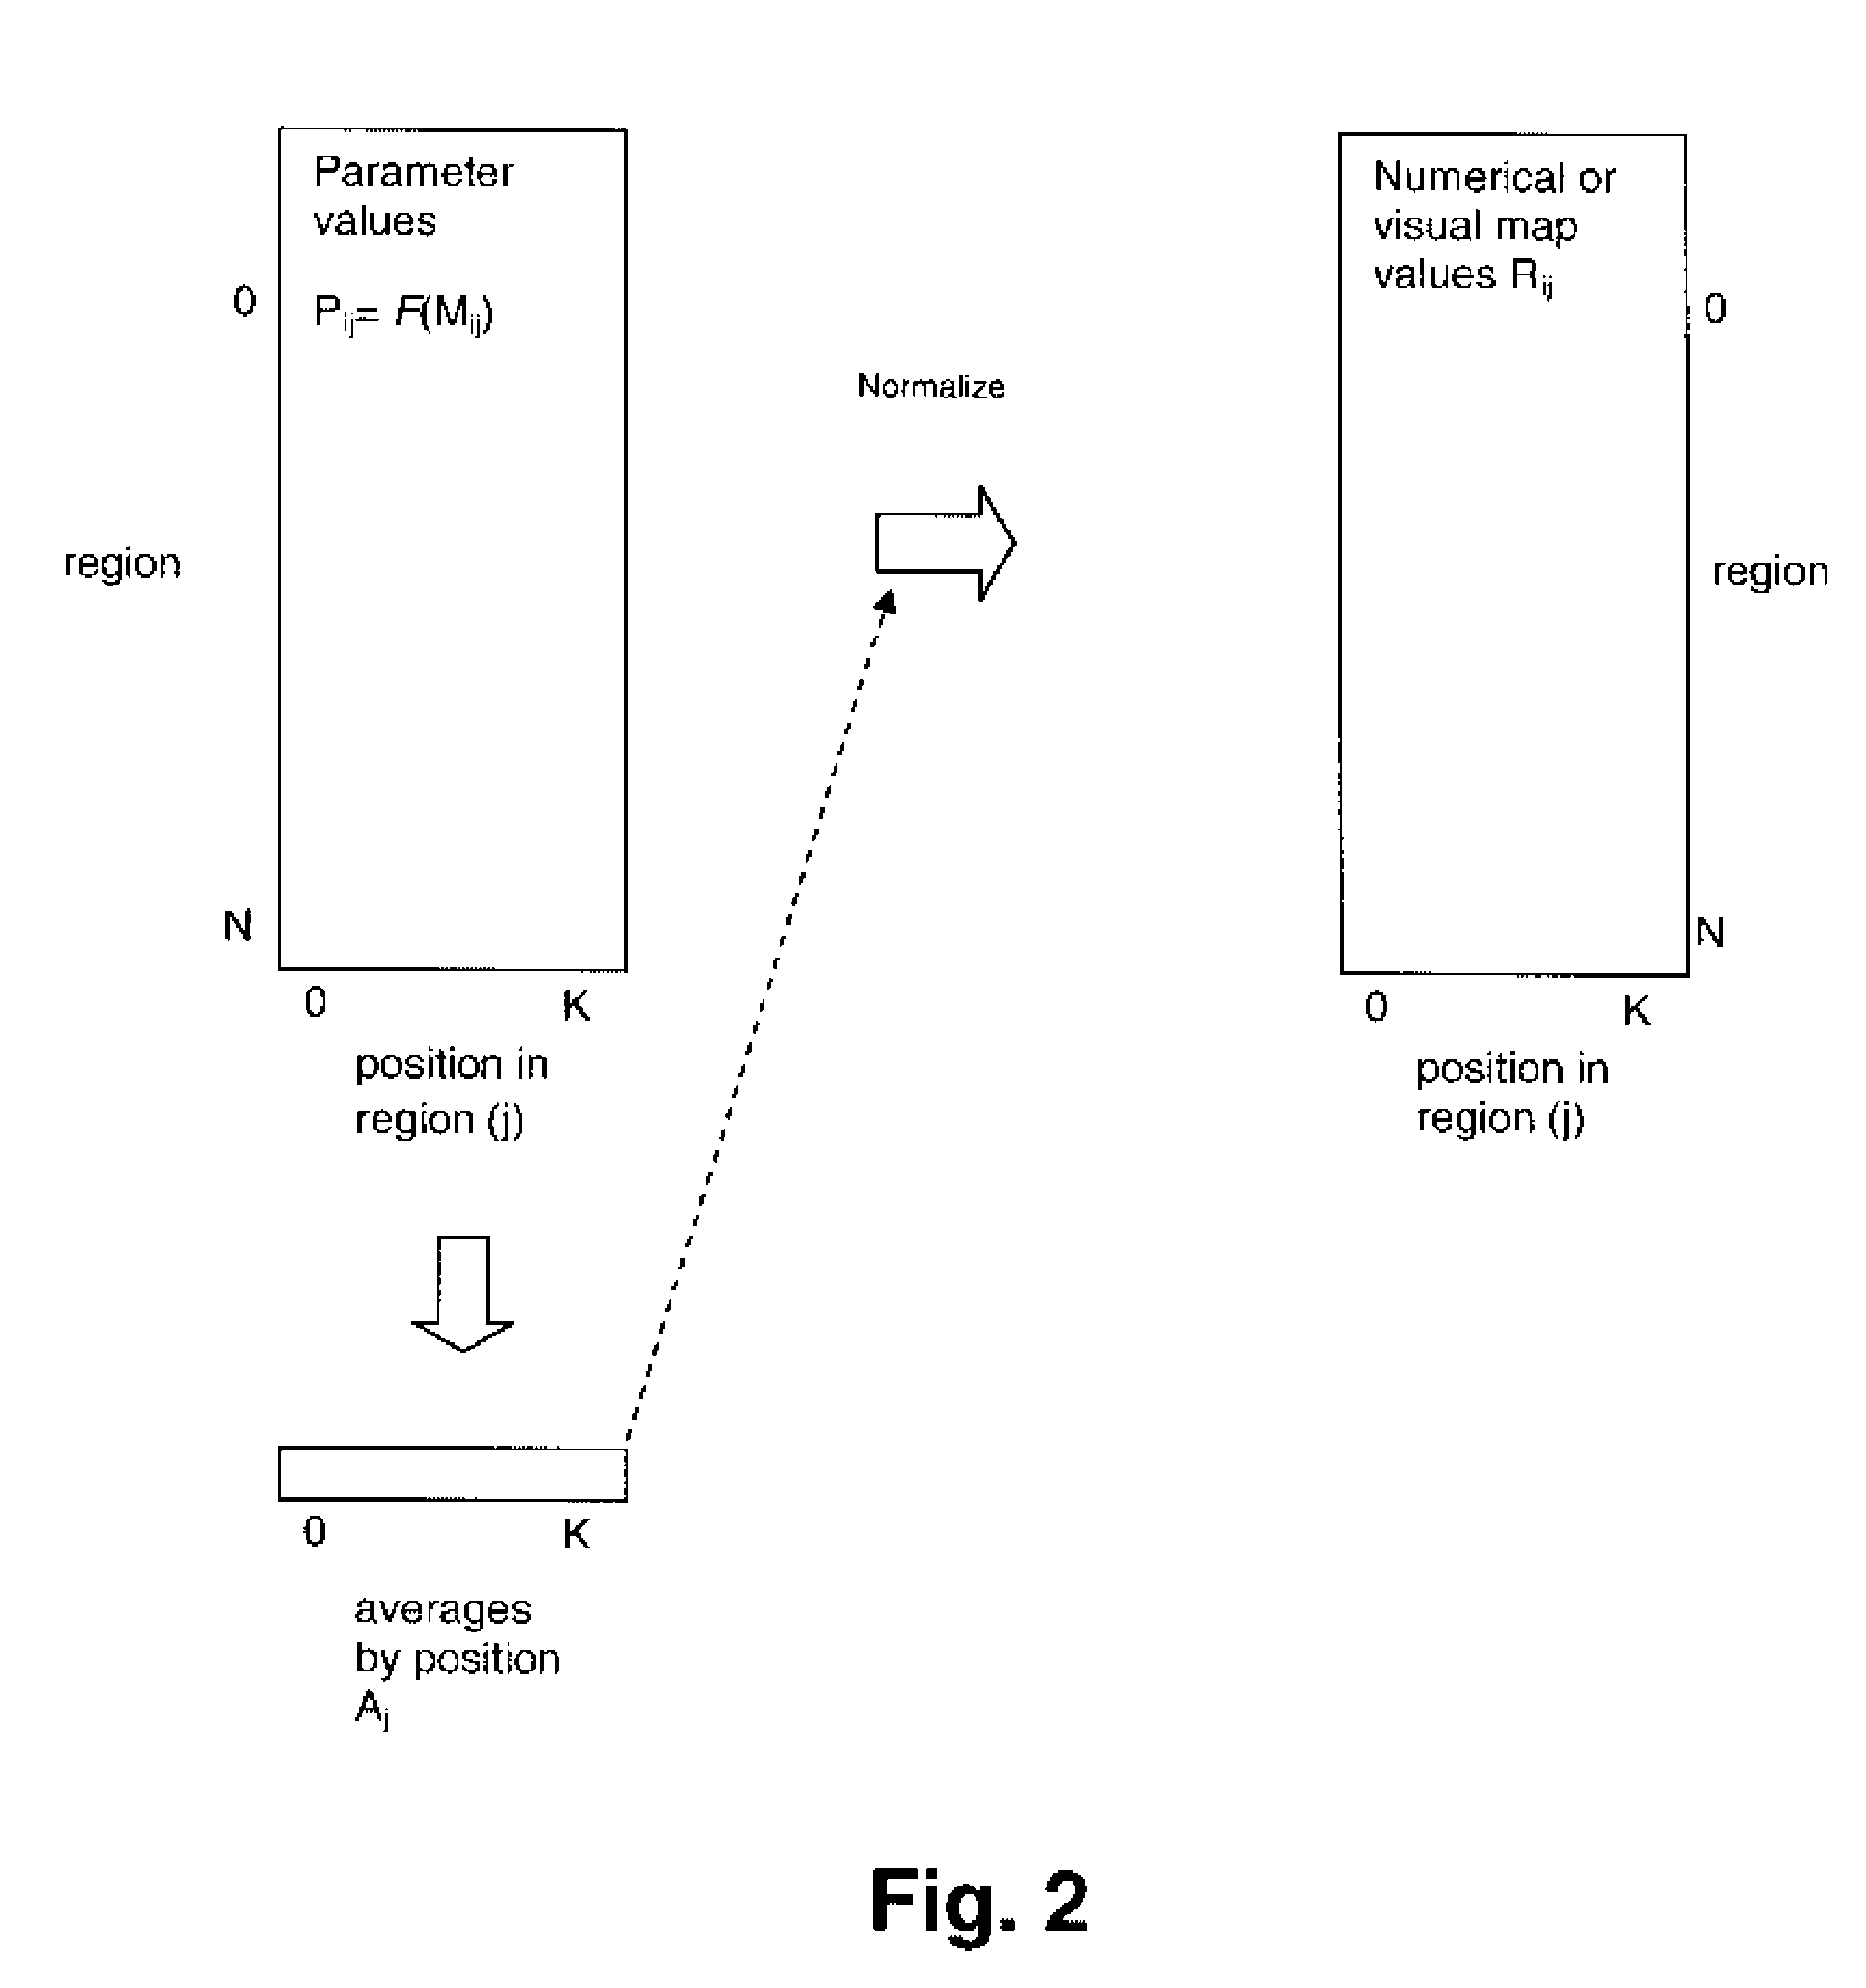 Techniques for filtering systematic differences from wafer evaluation parameters